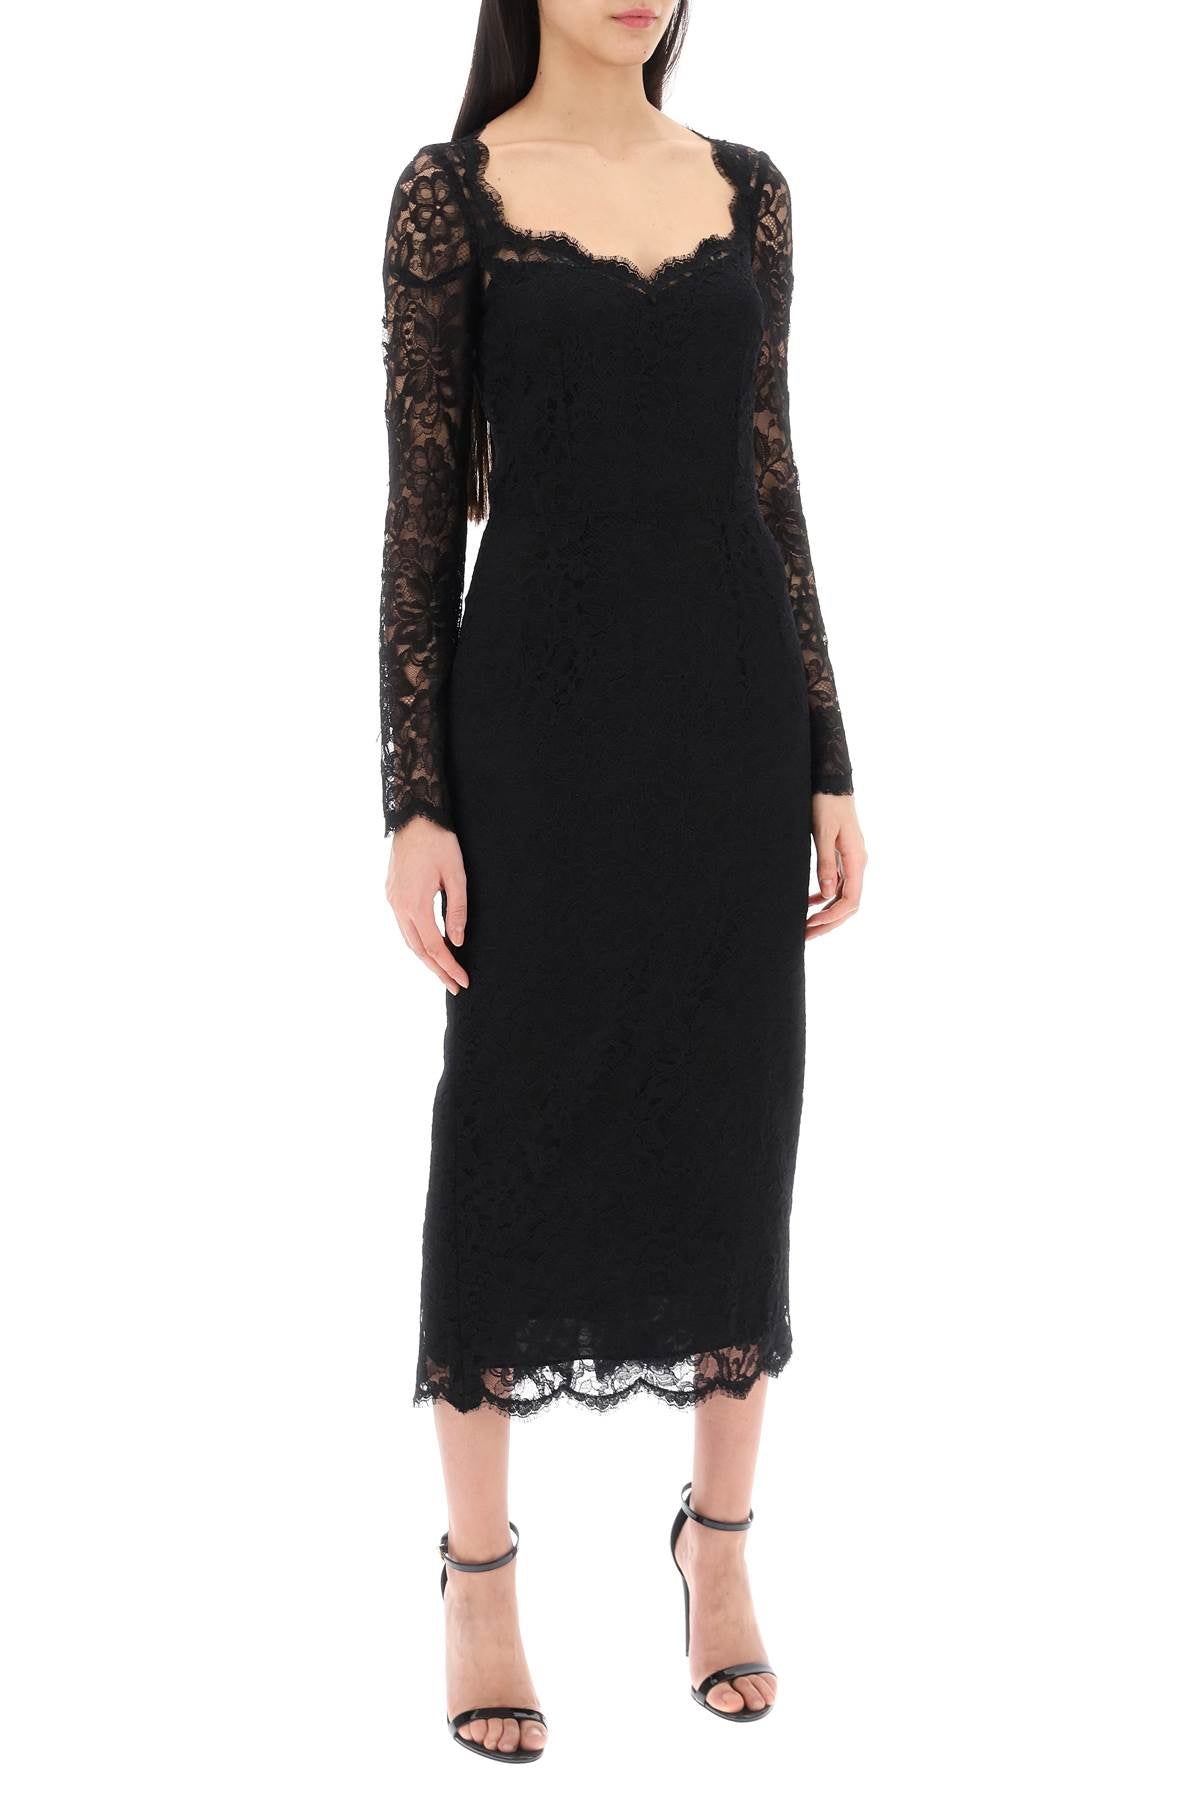 Dolce & gabbana midi dress in floral chantilly lace-1